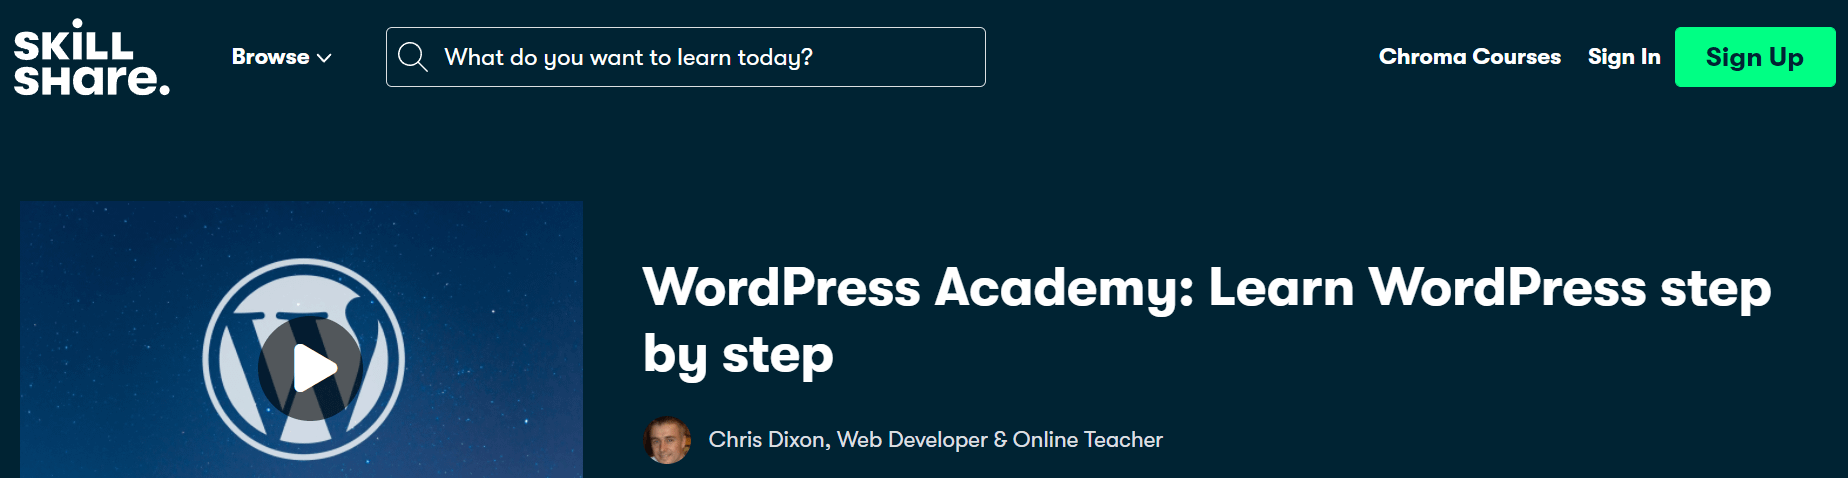 Learn WordPress step by step is one of the best free WordPress courses for beginners. 